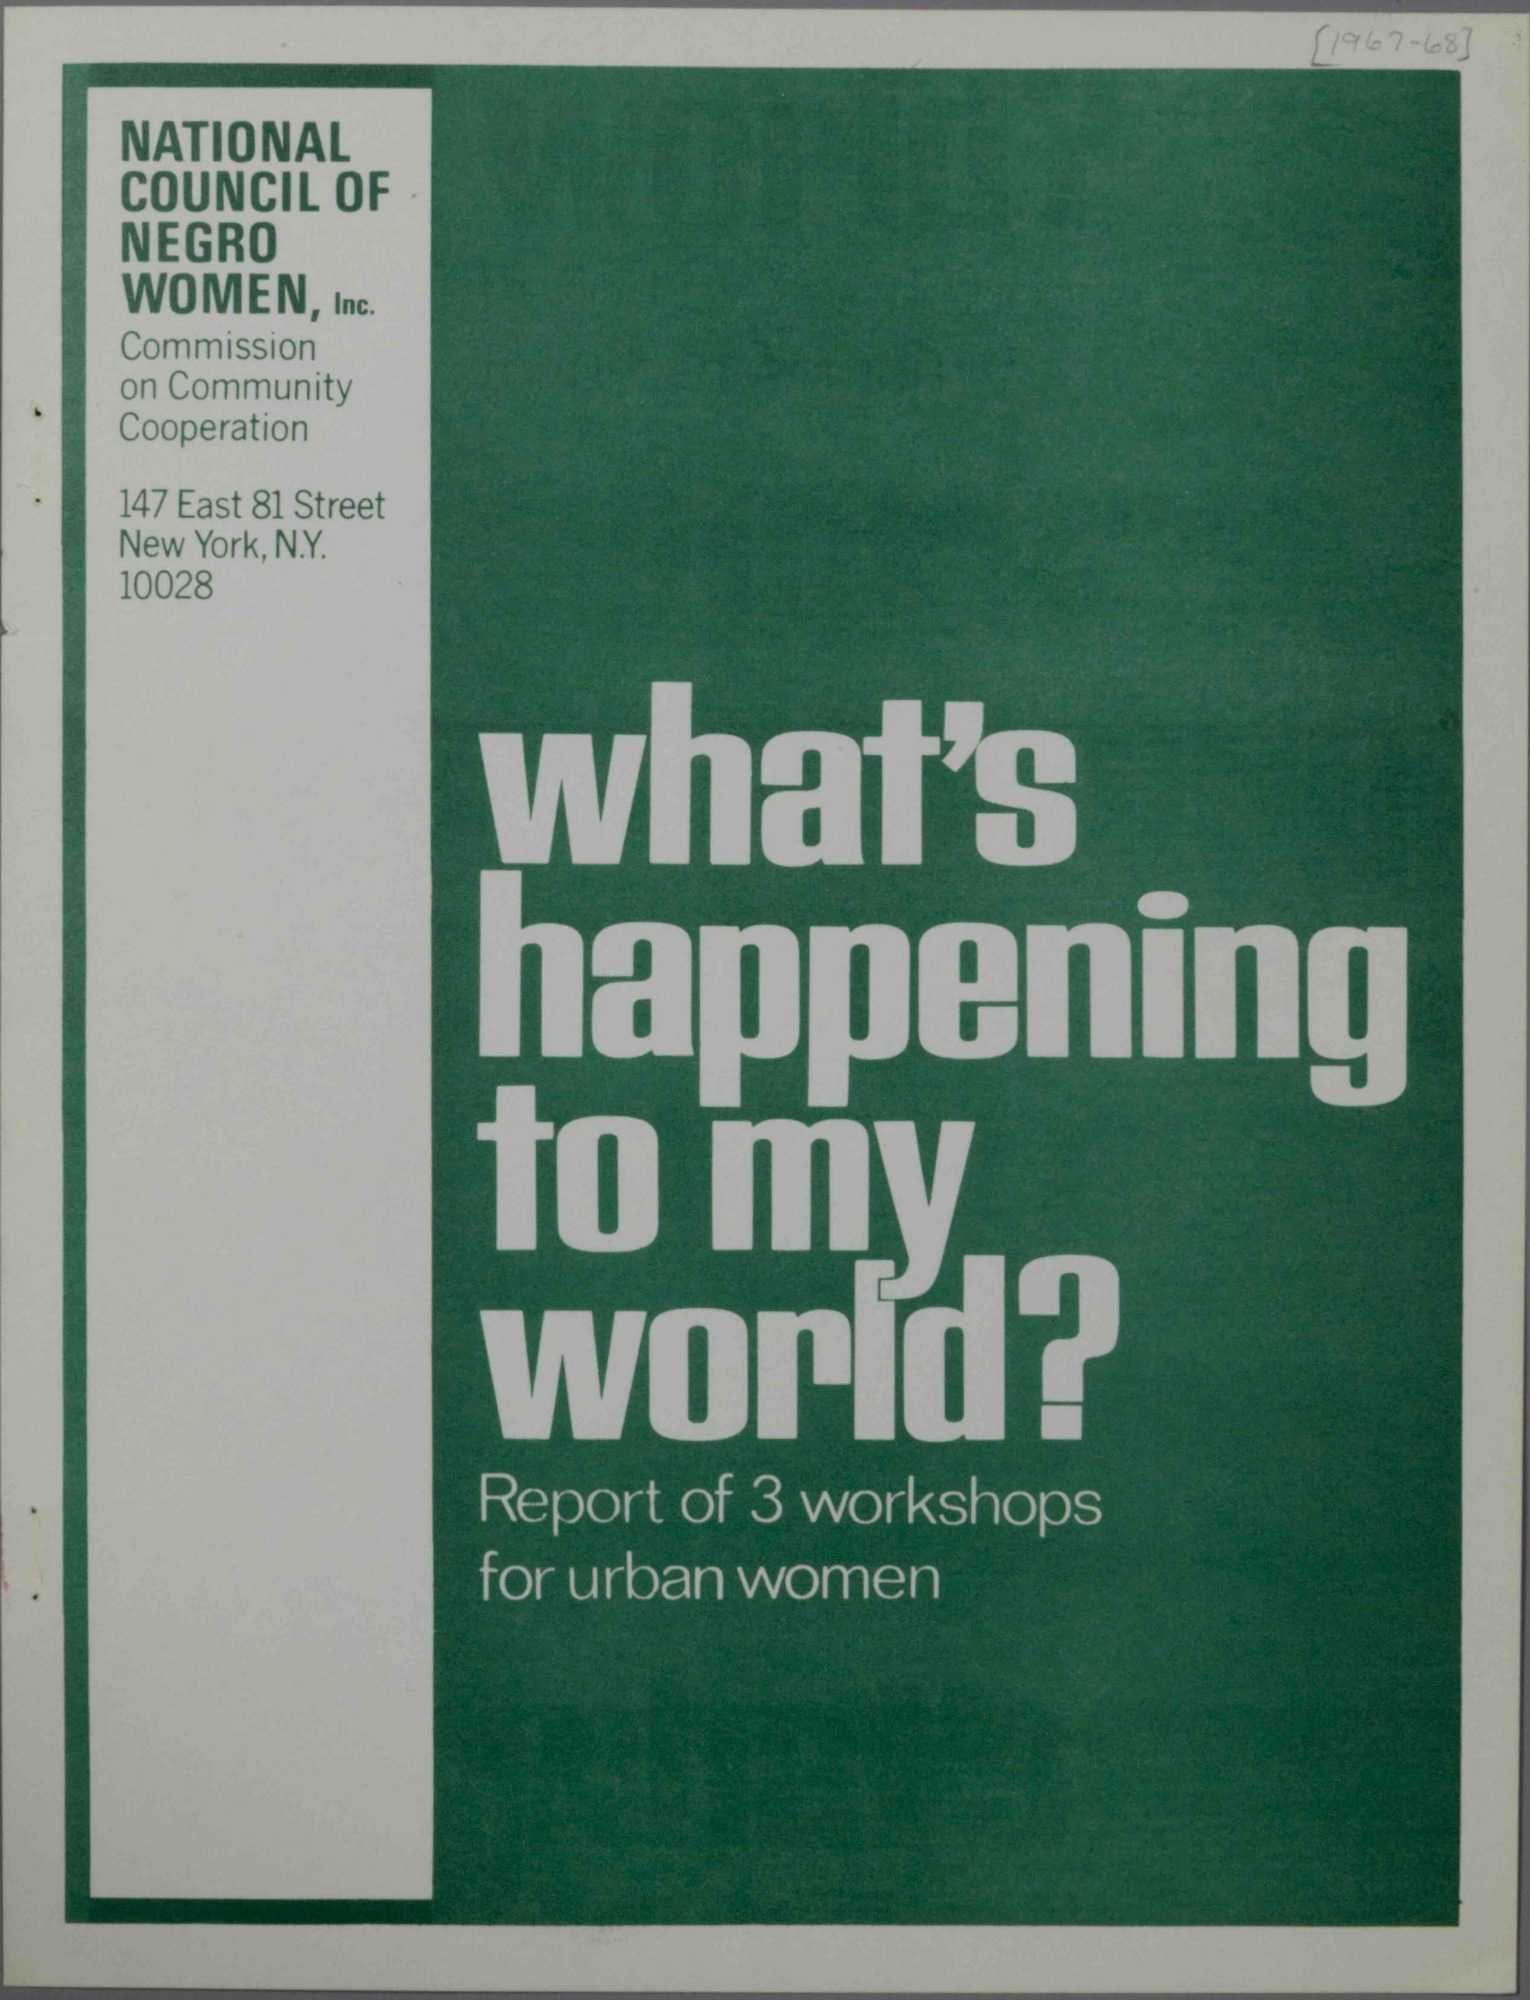 Cover image of What’s Happening to My World? Report of Three Workshops for Urban Women, ca. 1969